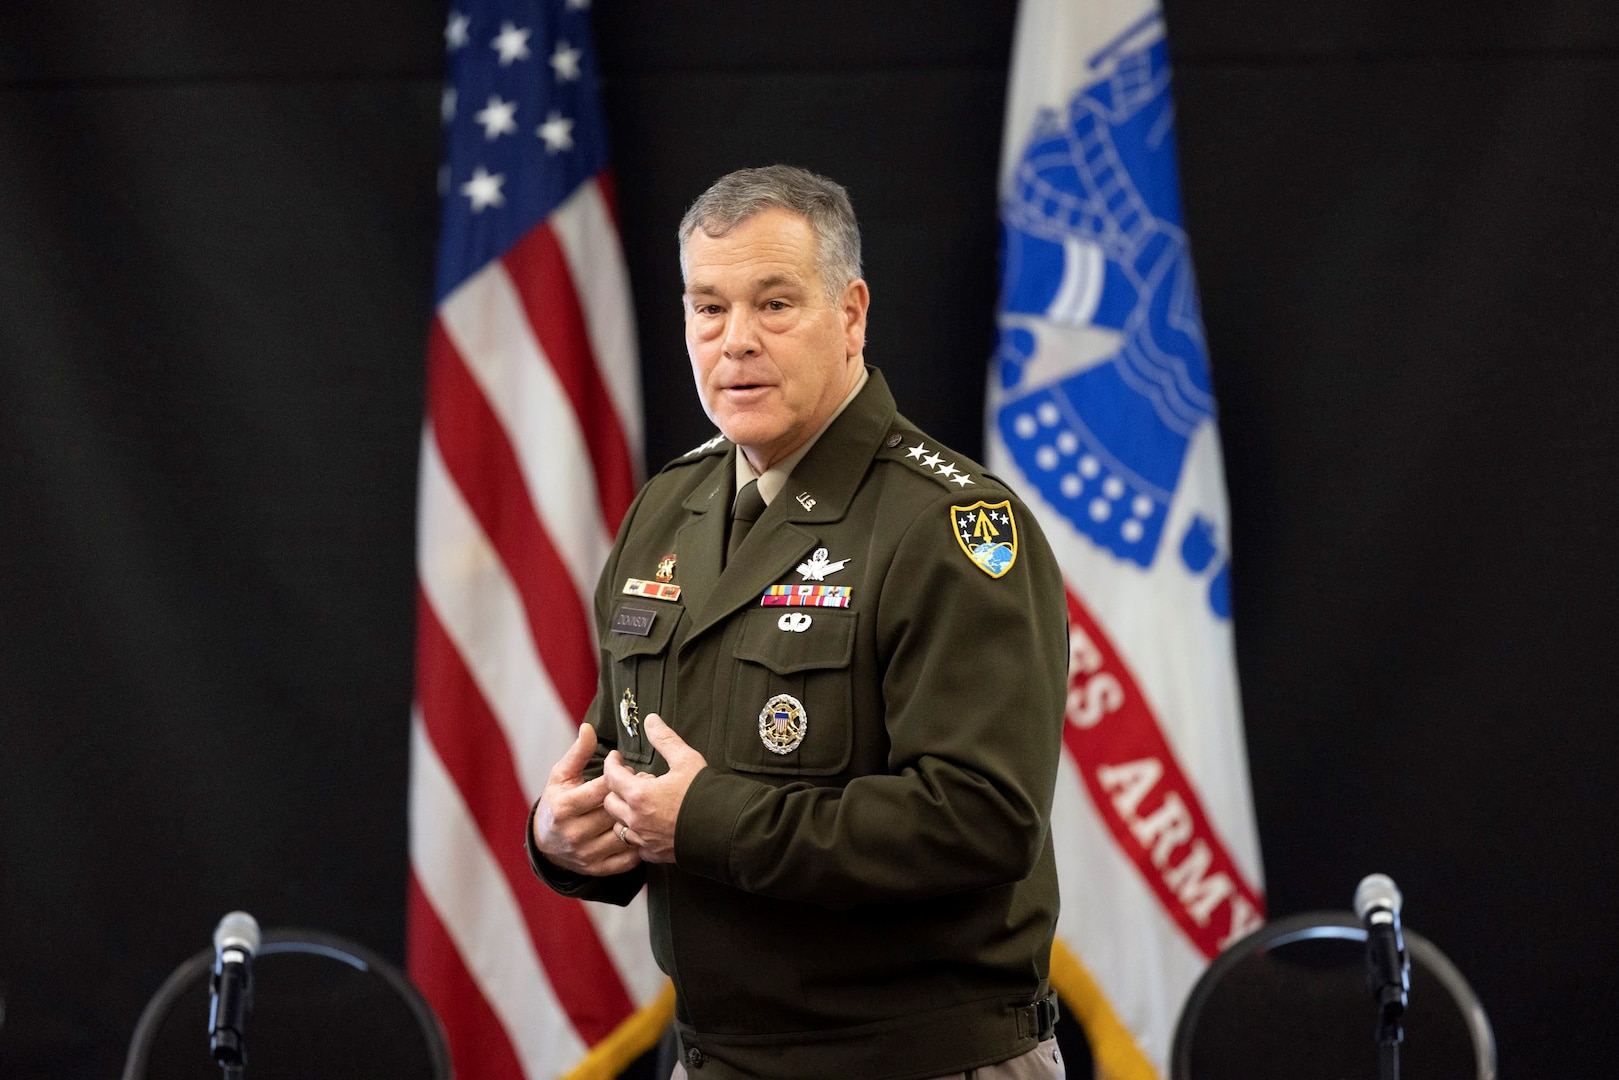 Gen. James Dickinson, U.S. Space Command commander, gives opening remarks  during an Academic Fair held at the U.S. Military Academy West Point, New York, Sept. 13-14.